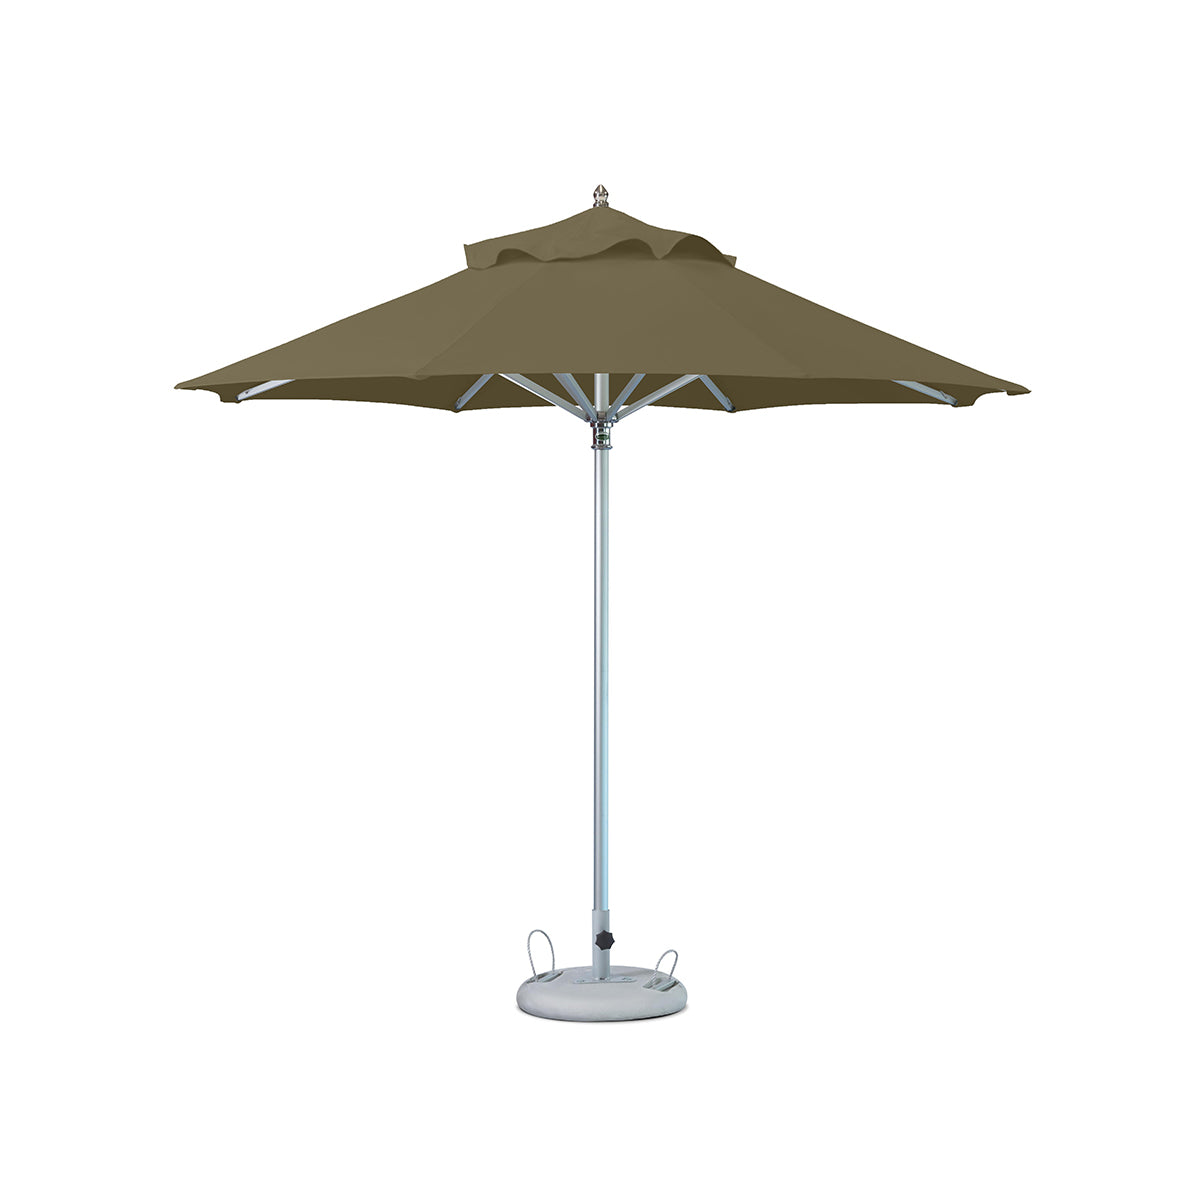 Umbrella Without Cords